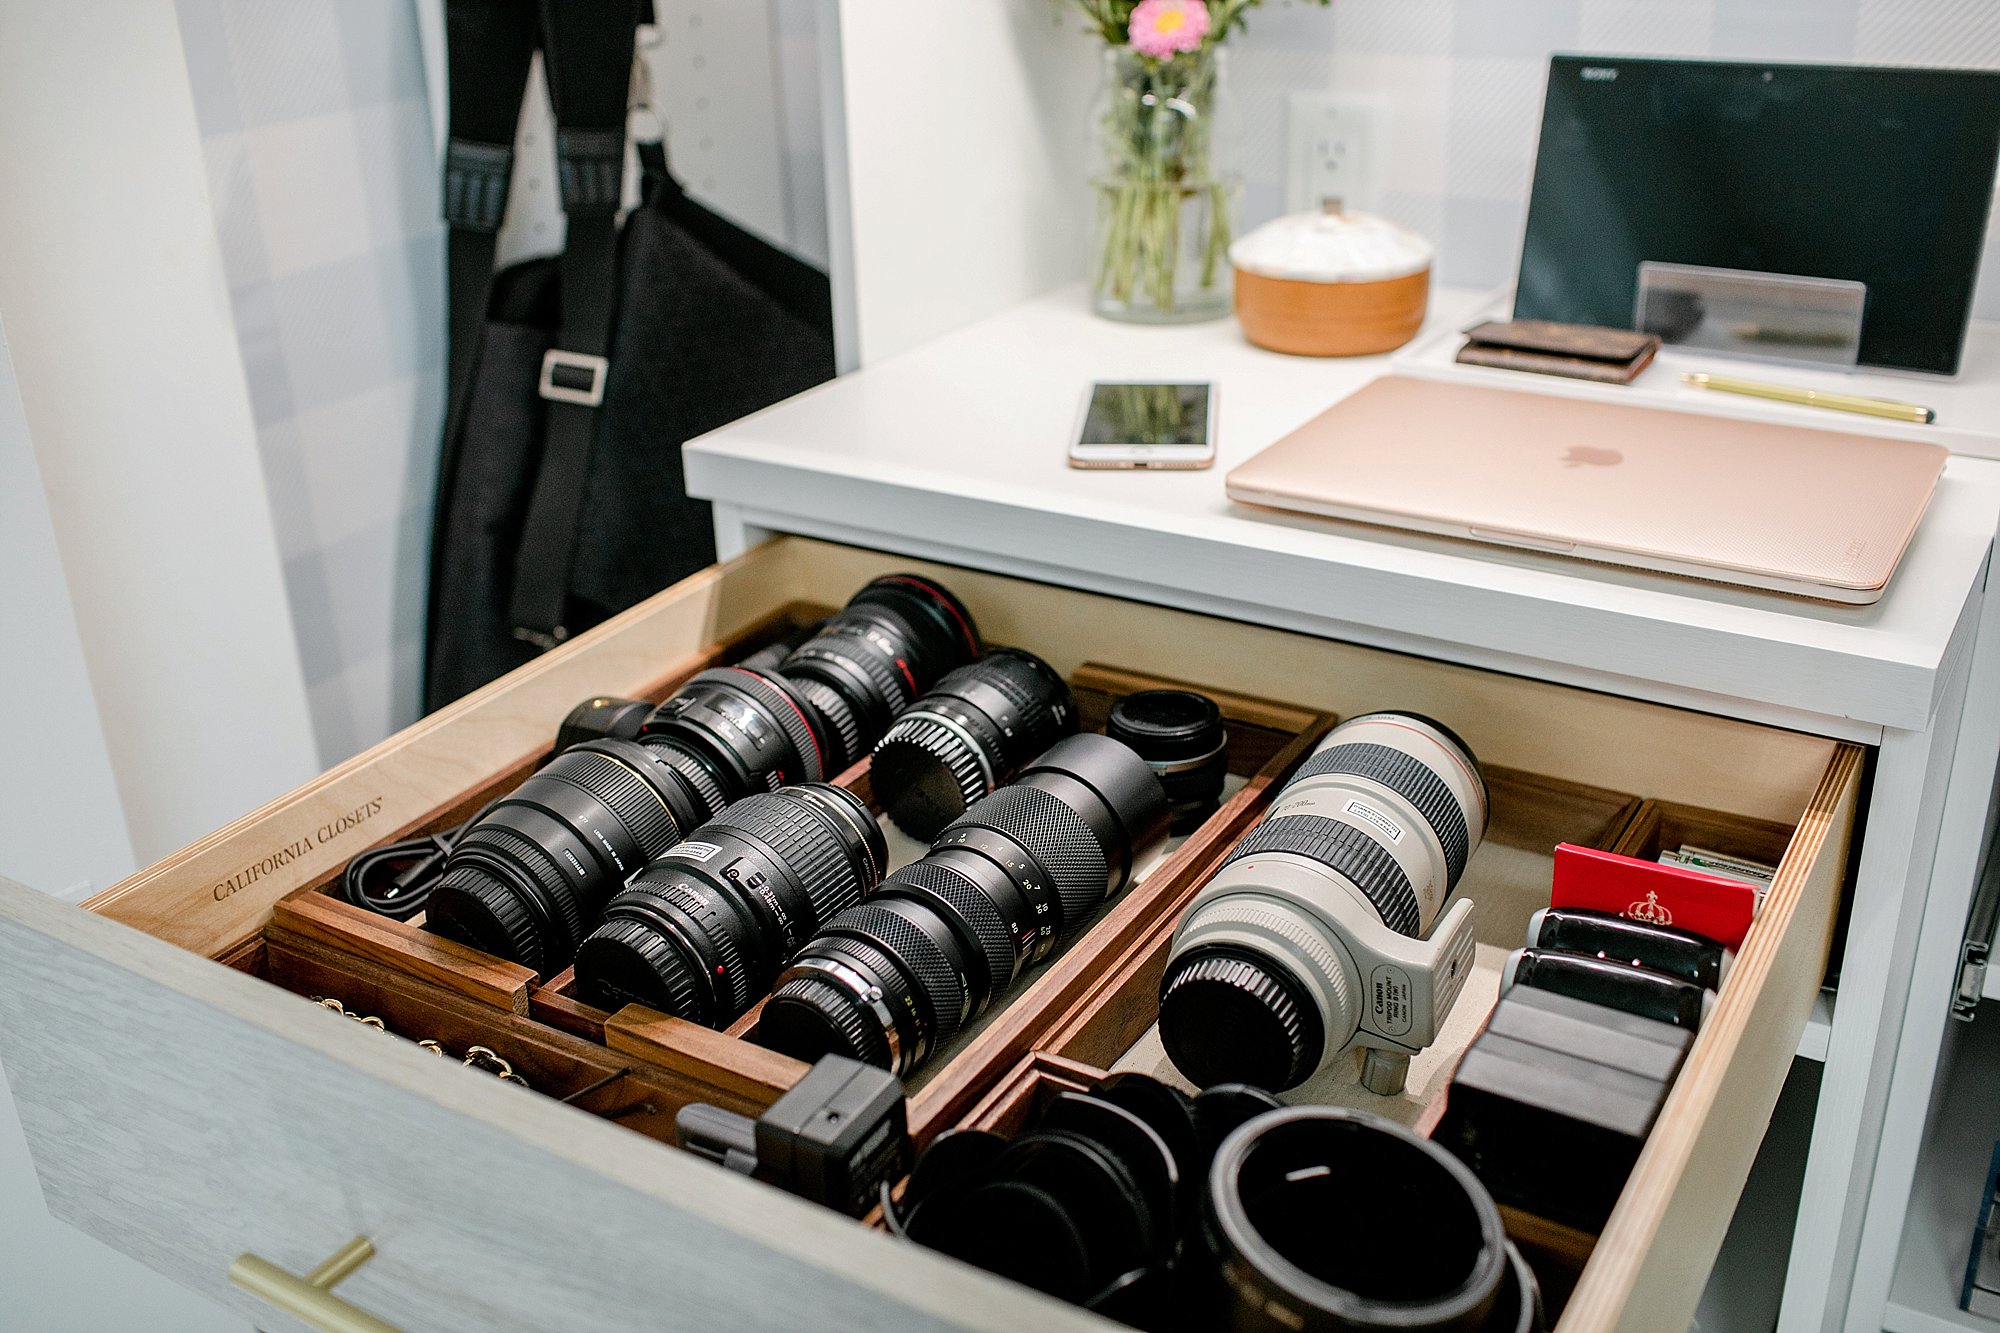 lens organization and camera lens drawer: final reveal of office closet reveal belonging to photographer blogger Diana Elizabeth in phoenix arizona. created by California closets and with removable buffalo check wallpaper #office #closet #wallpaper #organization #lensorganization #lensdrawer